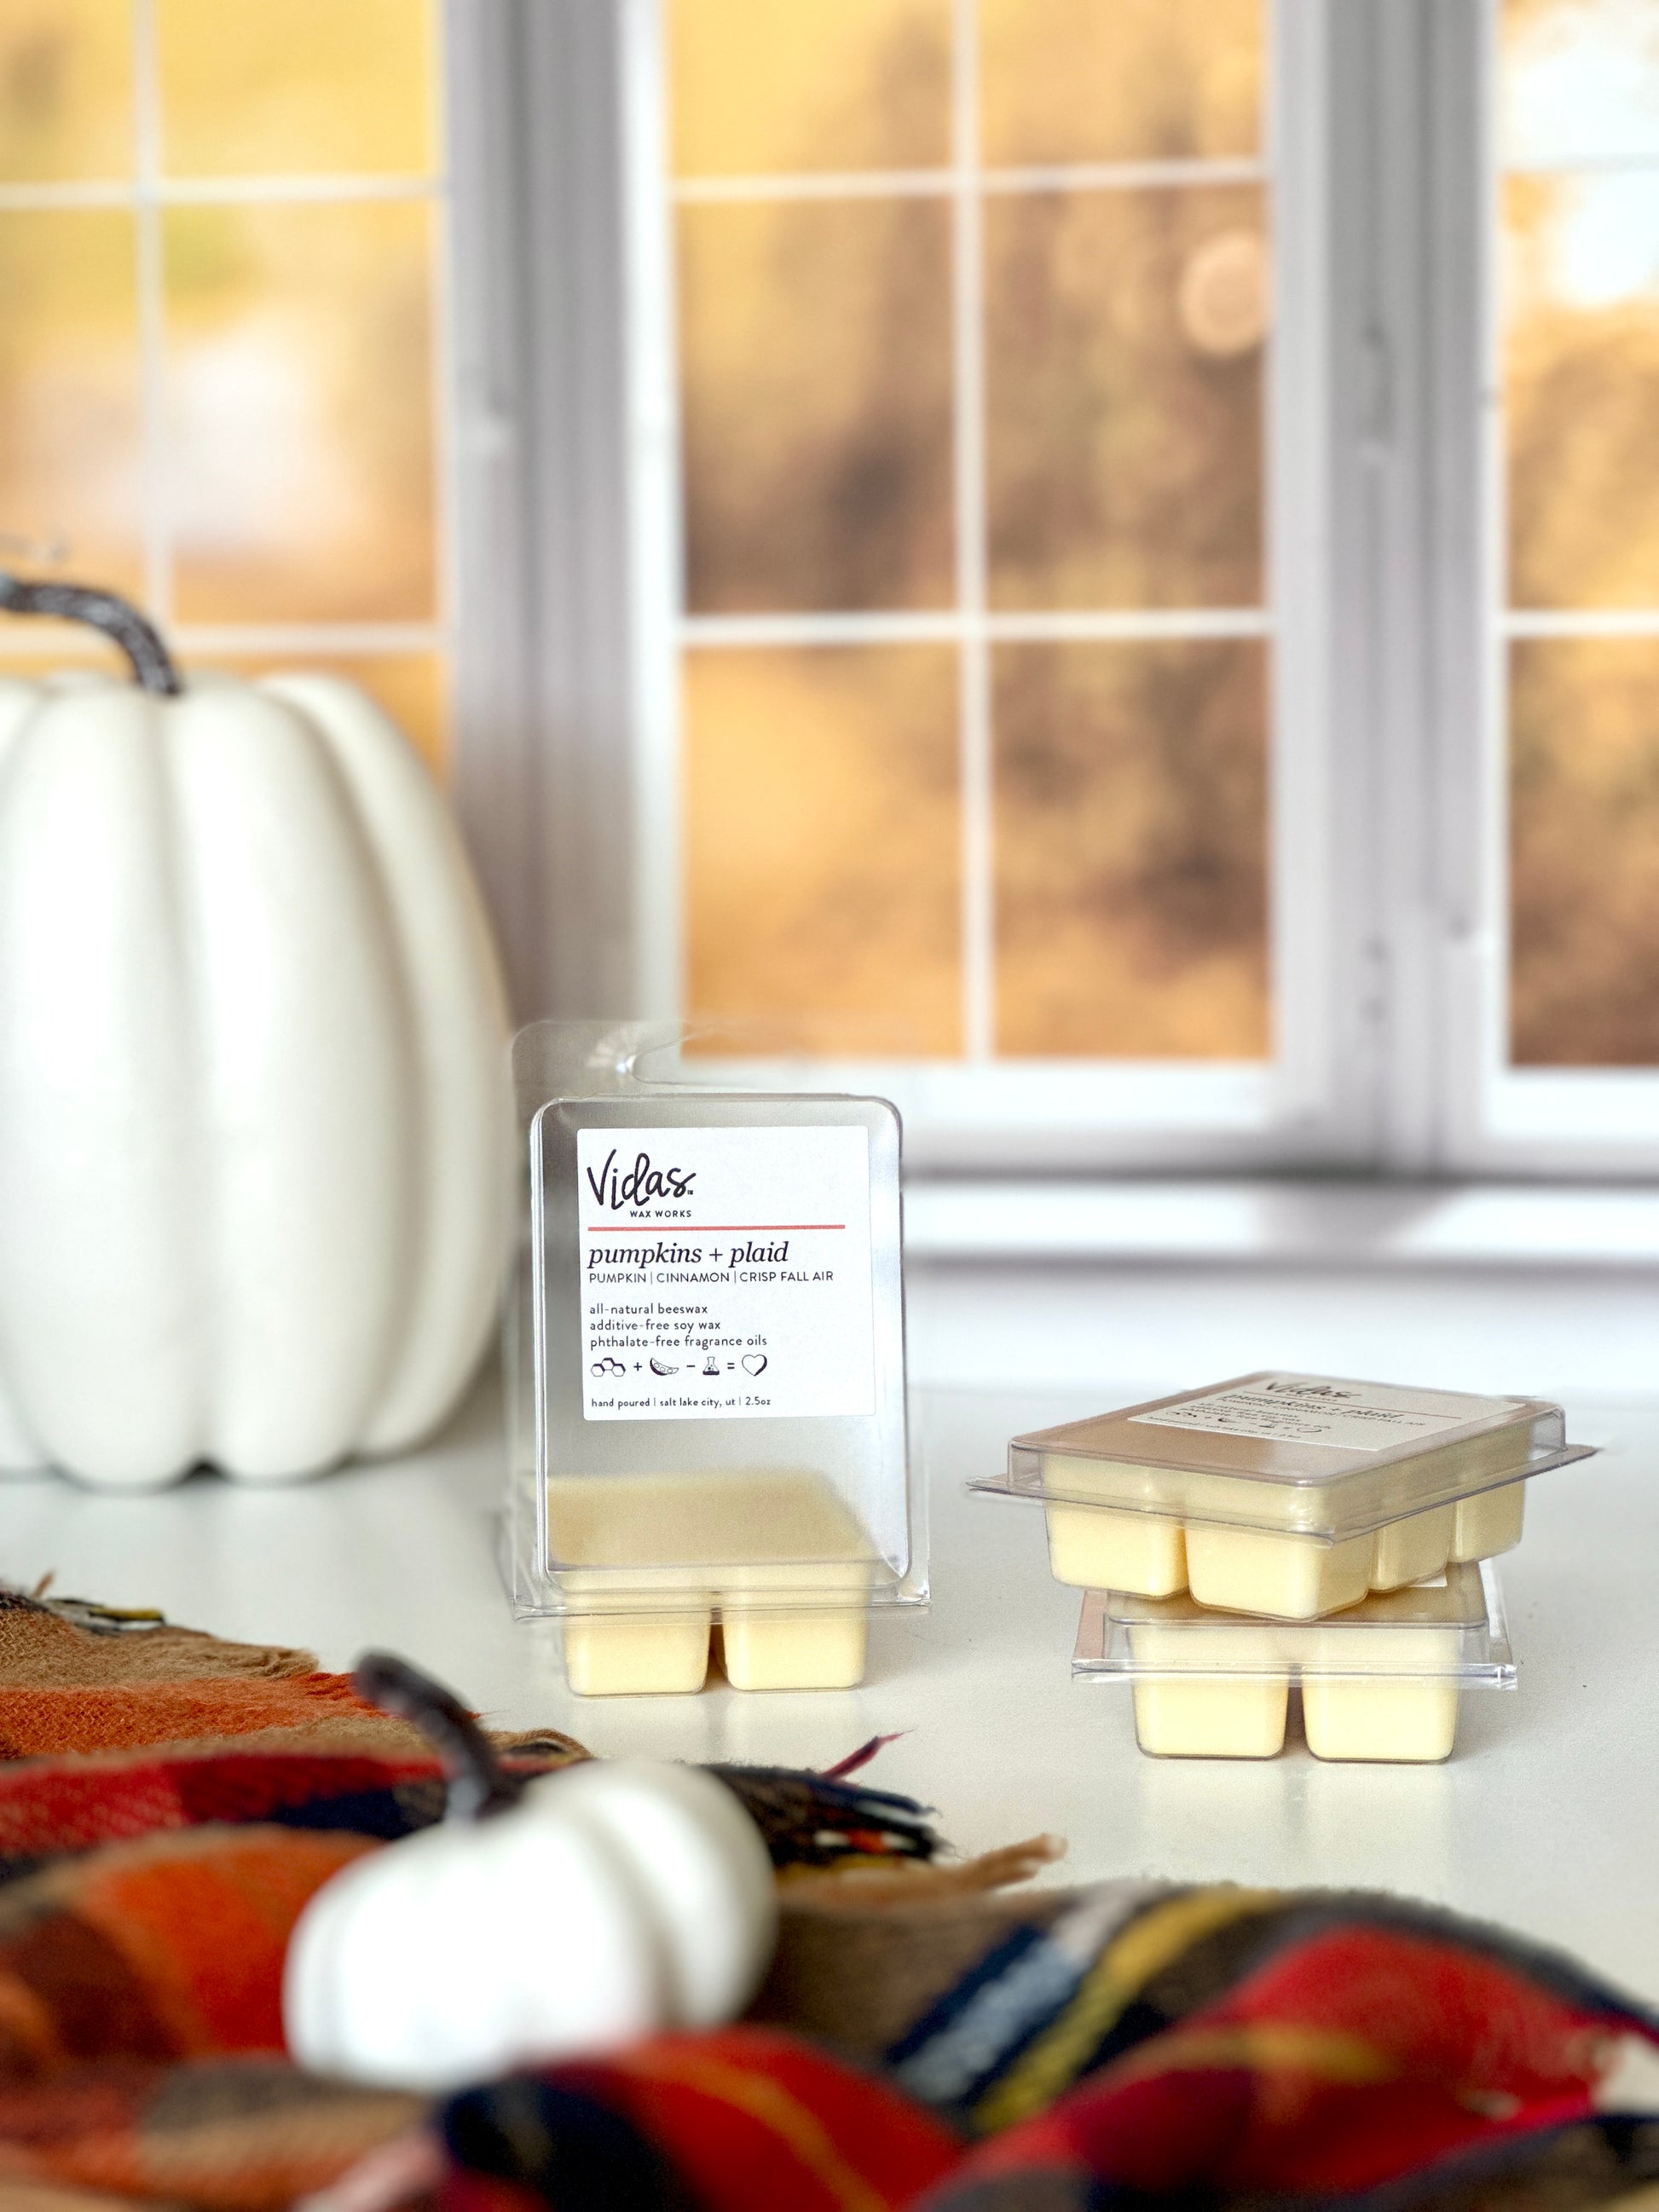 Capturing fall's allure: Pumpkins, cinnamon, and crisp fall air scent. A 2.5oz clamshell of wax melts sits open beside two neatly stacked packages. A plaid scarf adorned with a small white pumpkin graces the foreground, while a taller white pumpkin rests against the backdrop of blurred yellow fall leaves outside a window, echoing the season's charm.